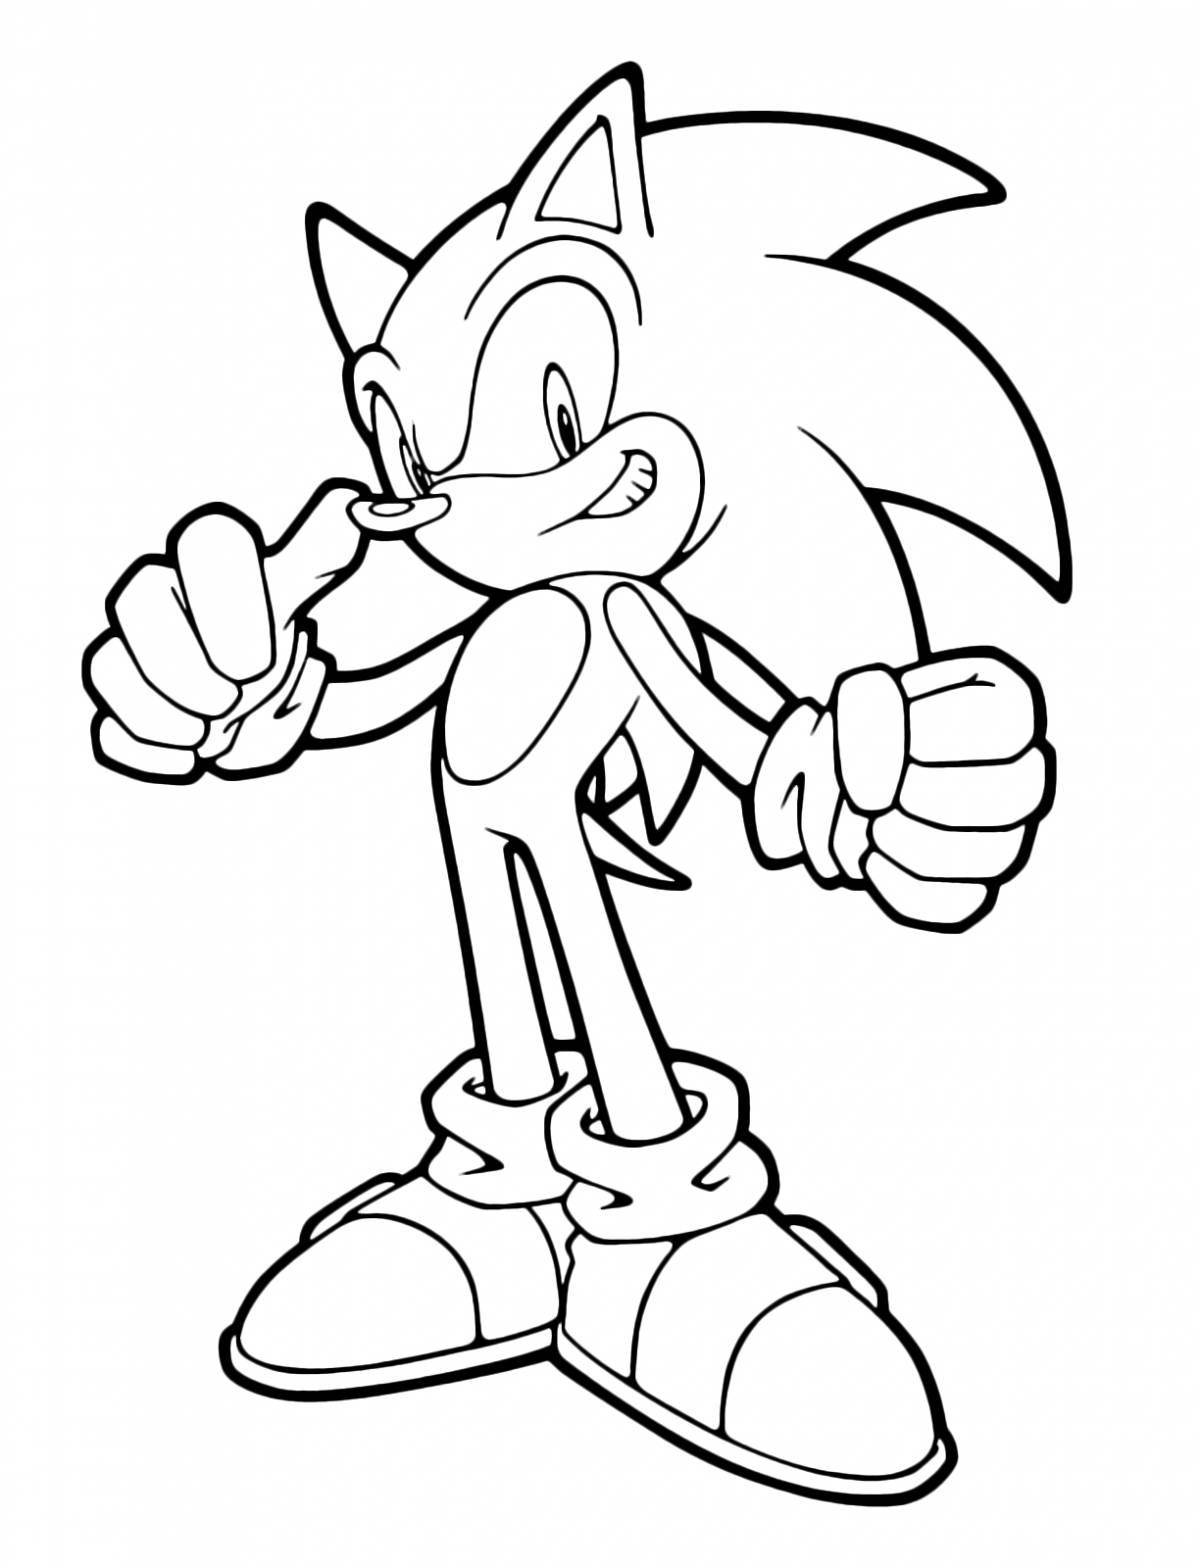 Dazzling coloring black sonic